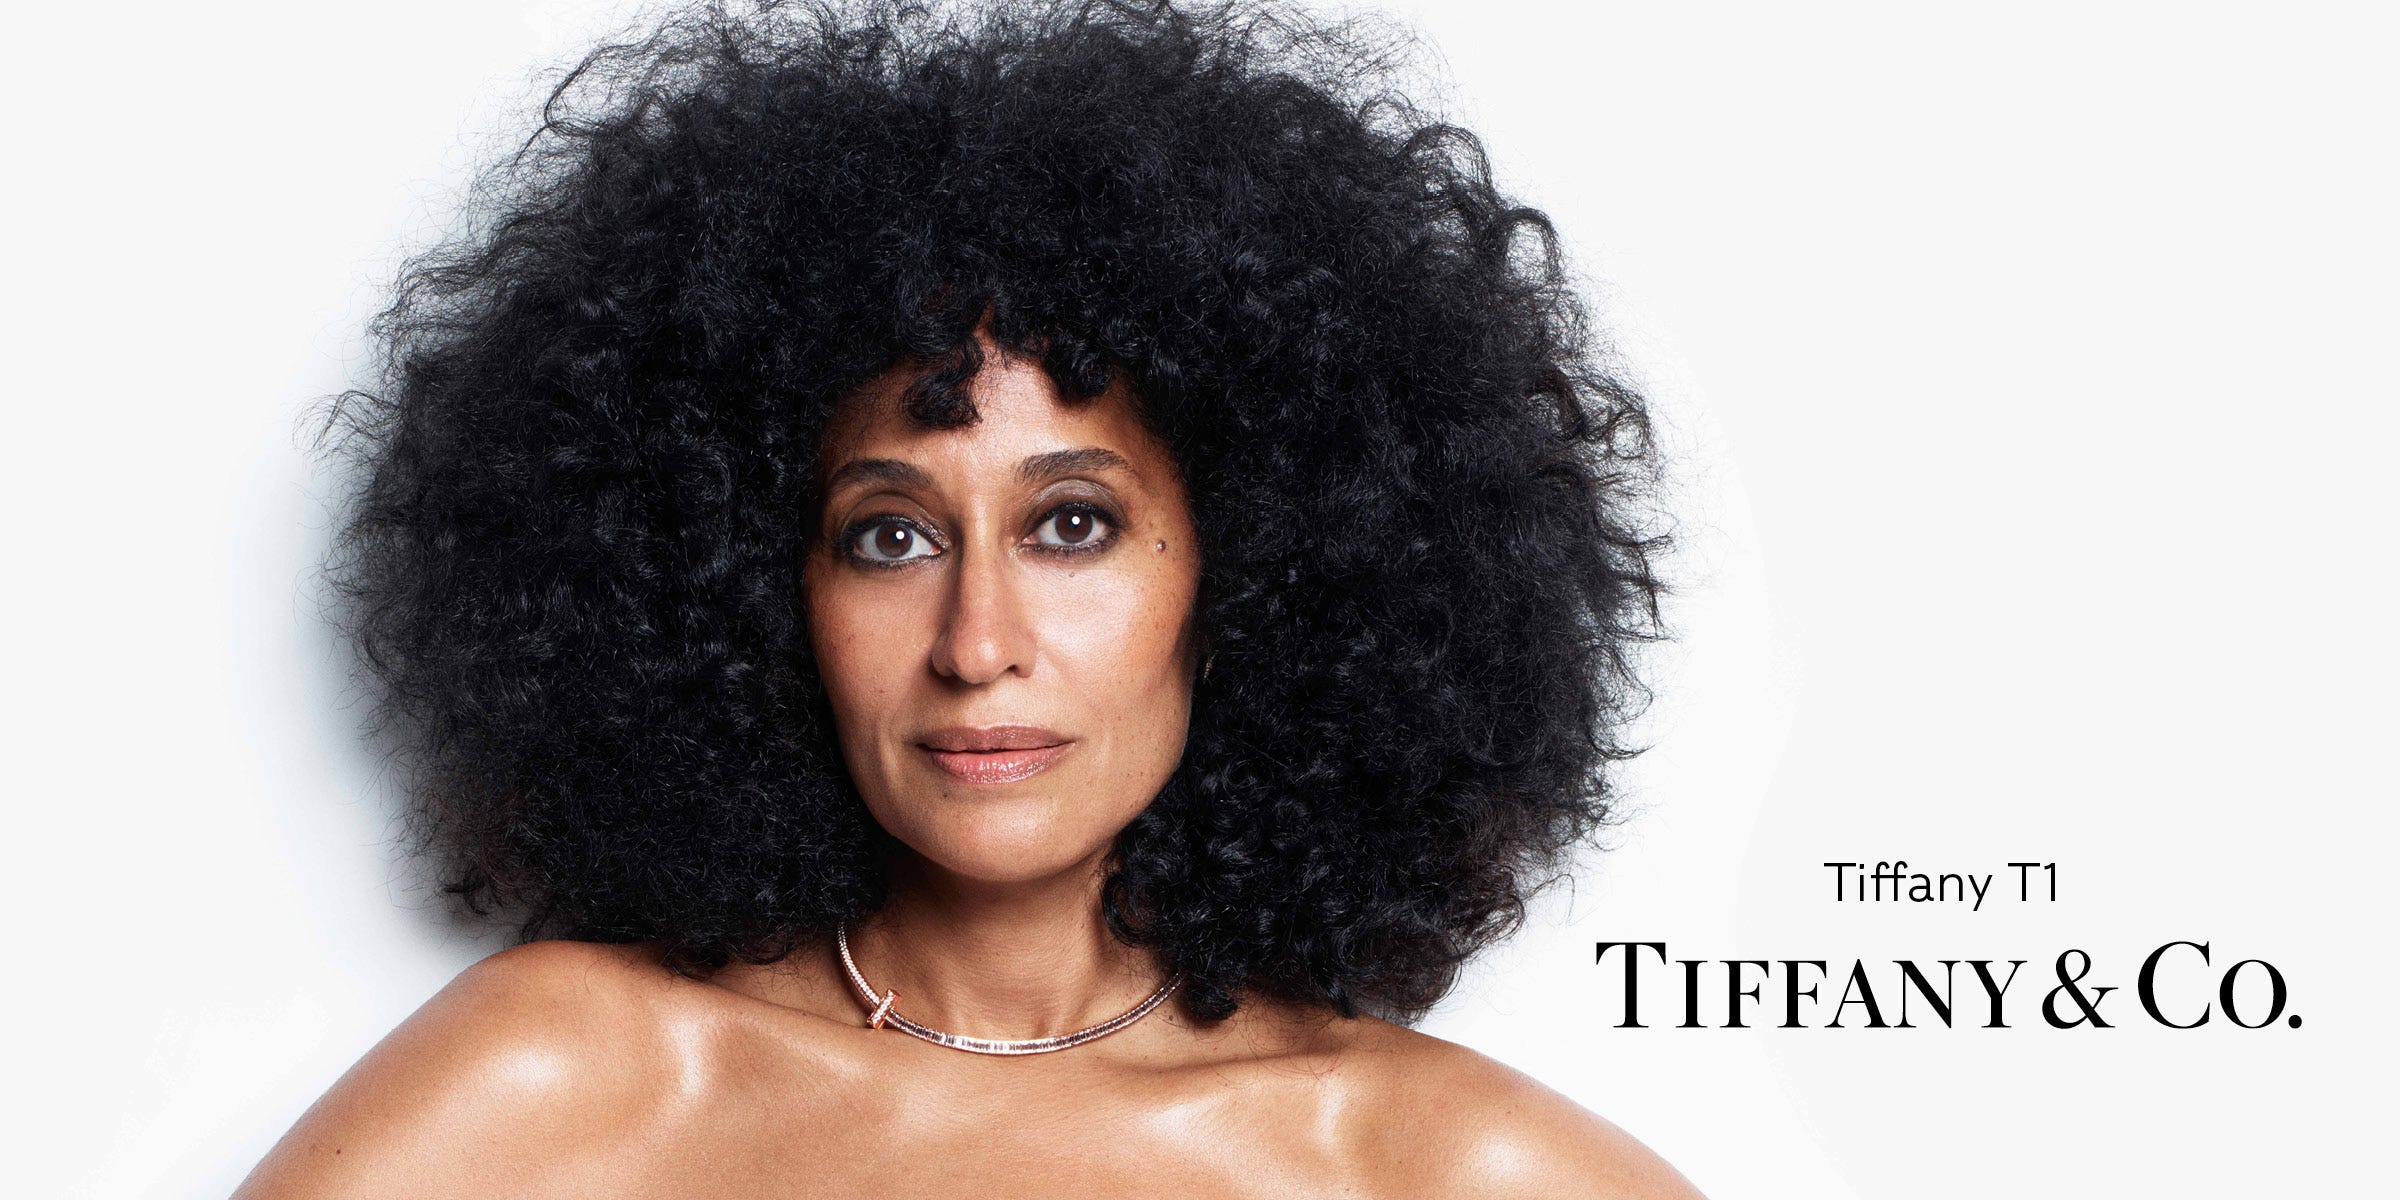 Tracee Ellis Ross is the New Face of Tiffany & Co.